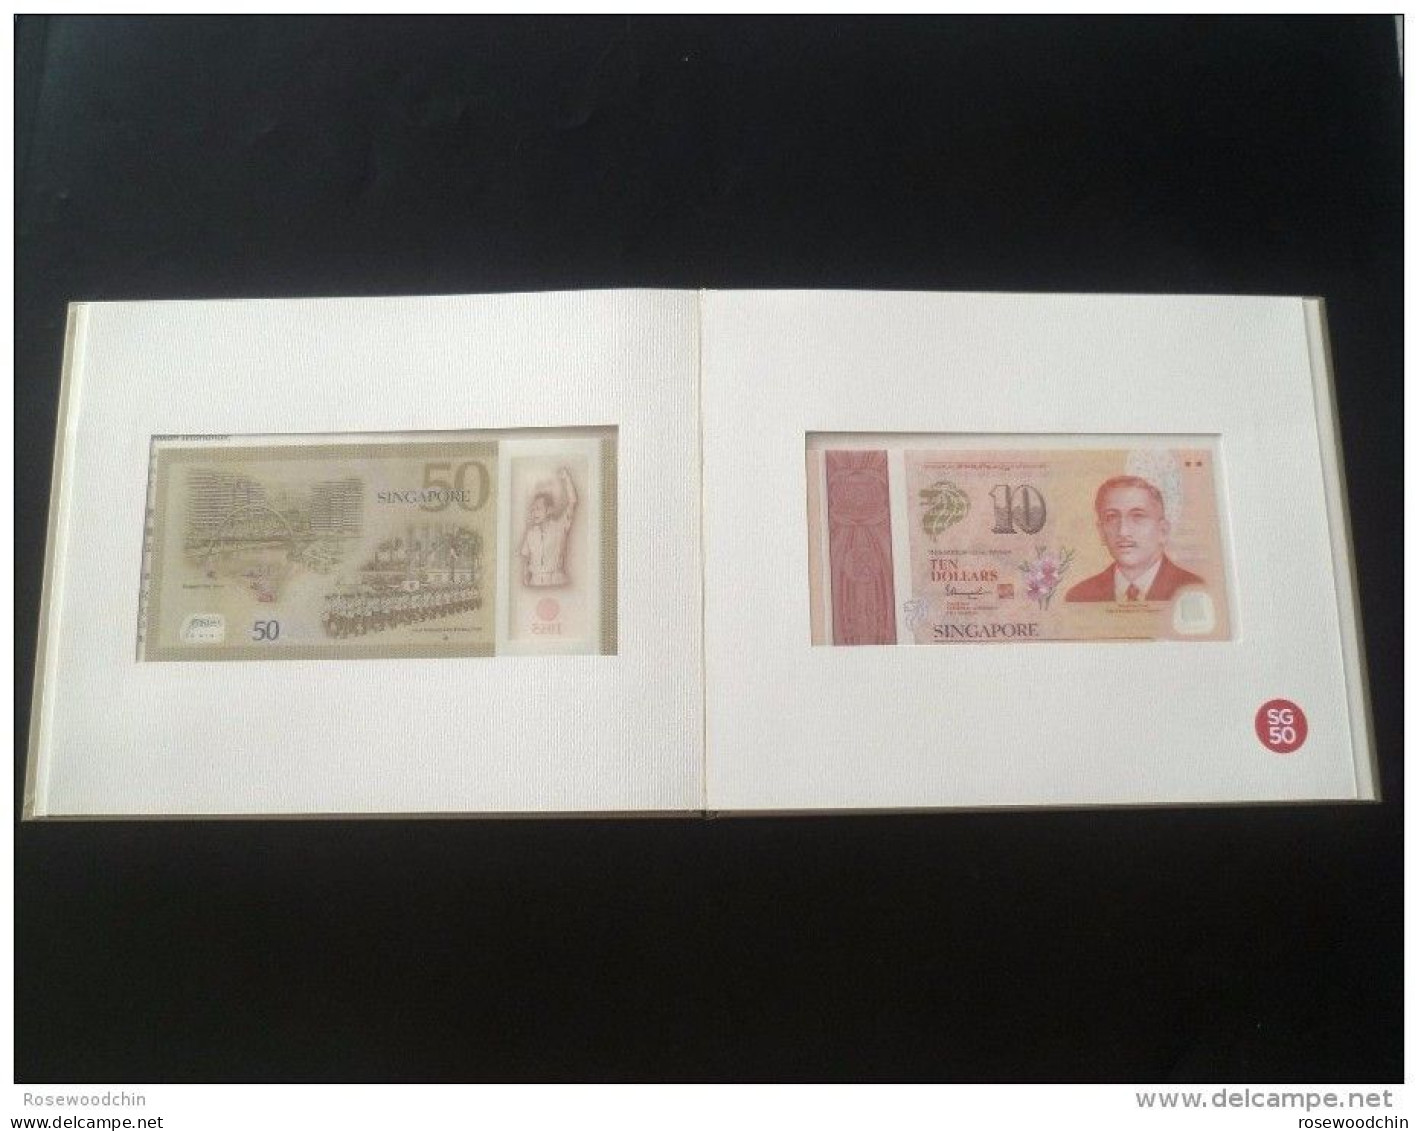 LIMITED EDITION ! Singapore Commemorative Banknote SG50 Golden Jubilee With Folder  @  Lee Kuan Yew - Singapore